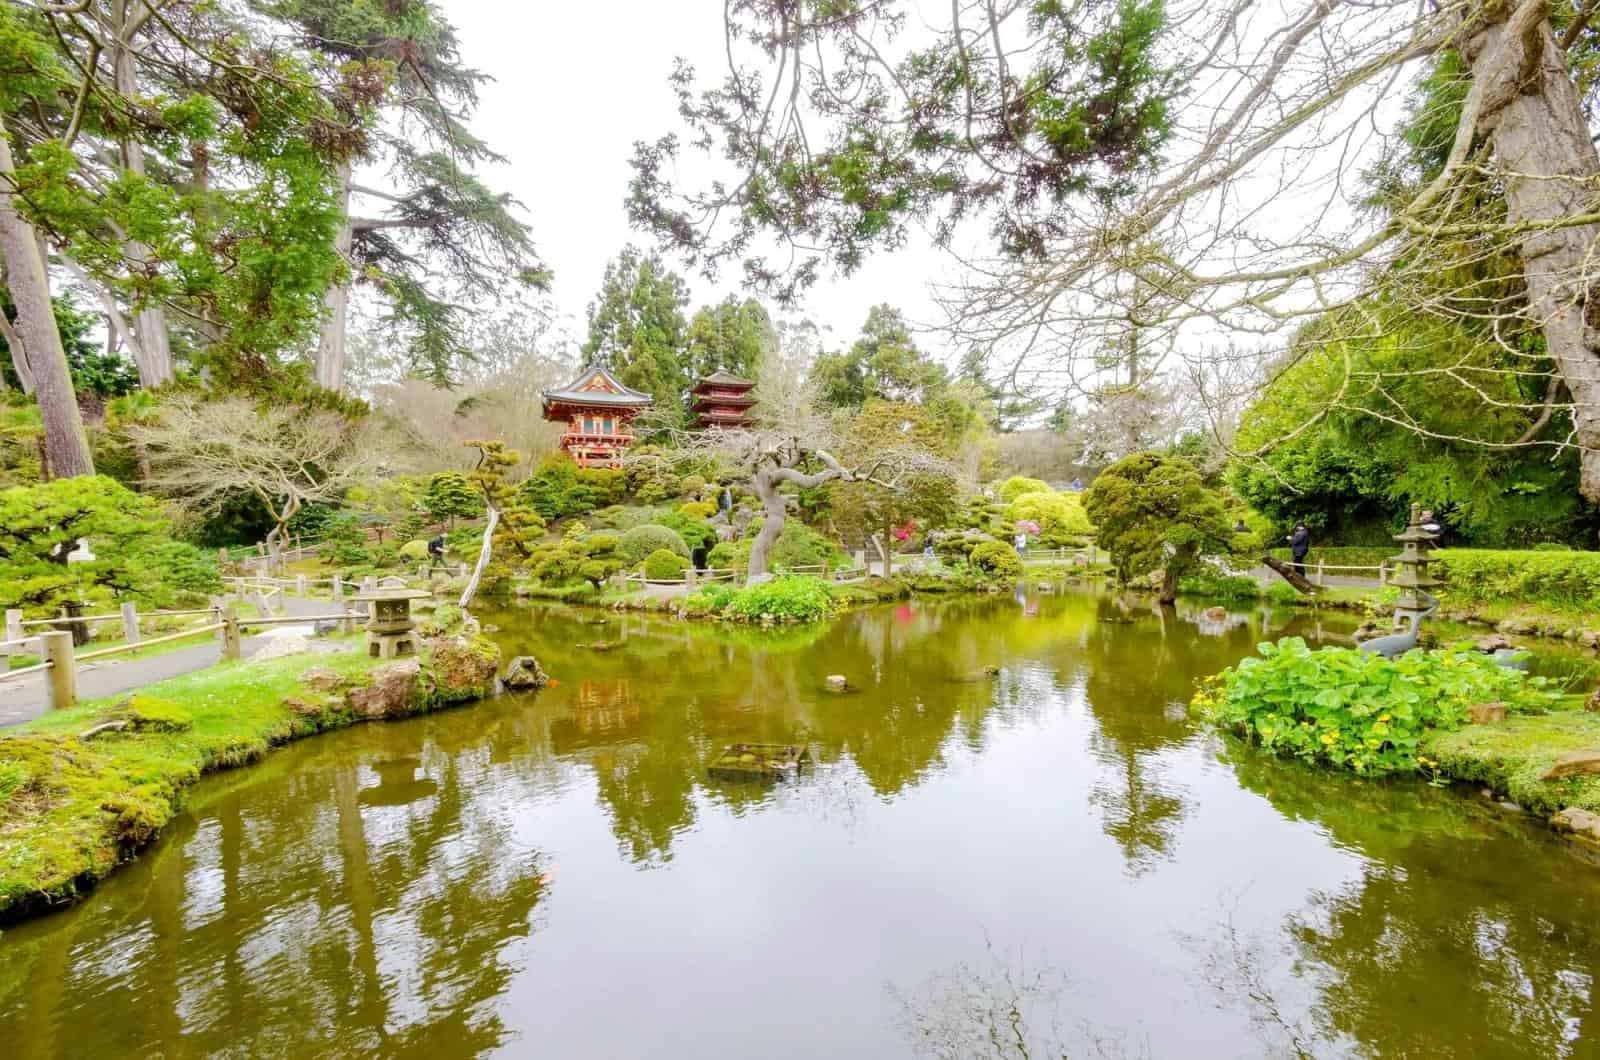 View of the Japanese tea garden in the Golden Gate Park in San Francisco